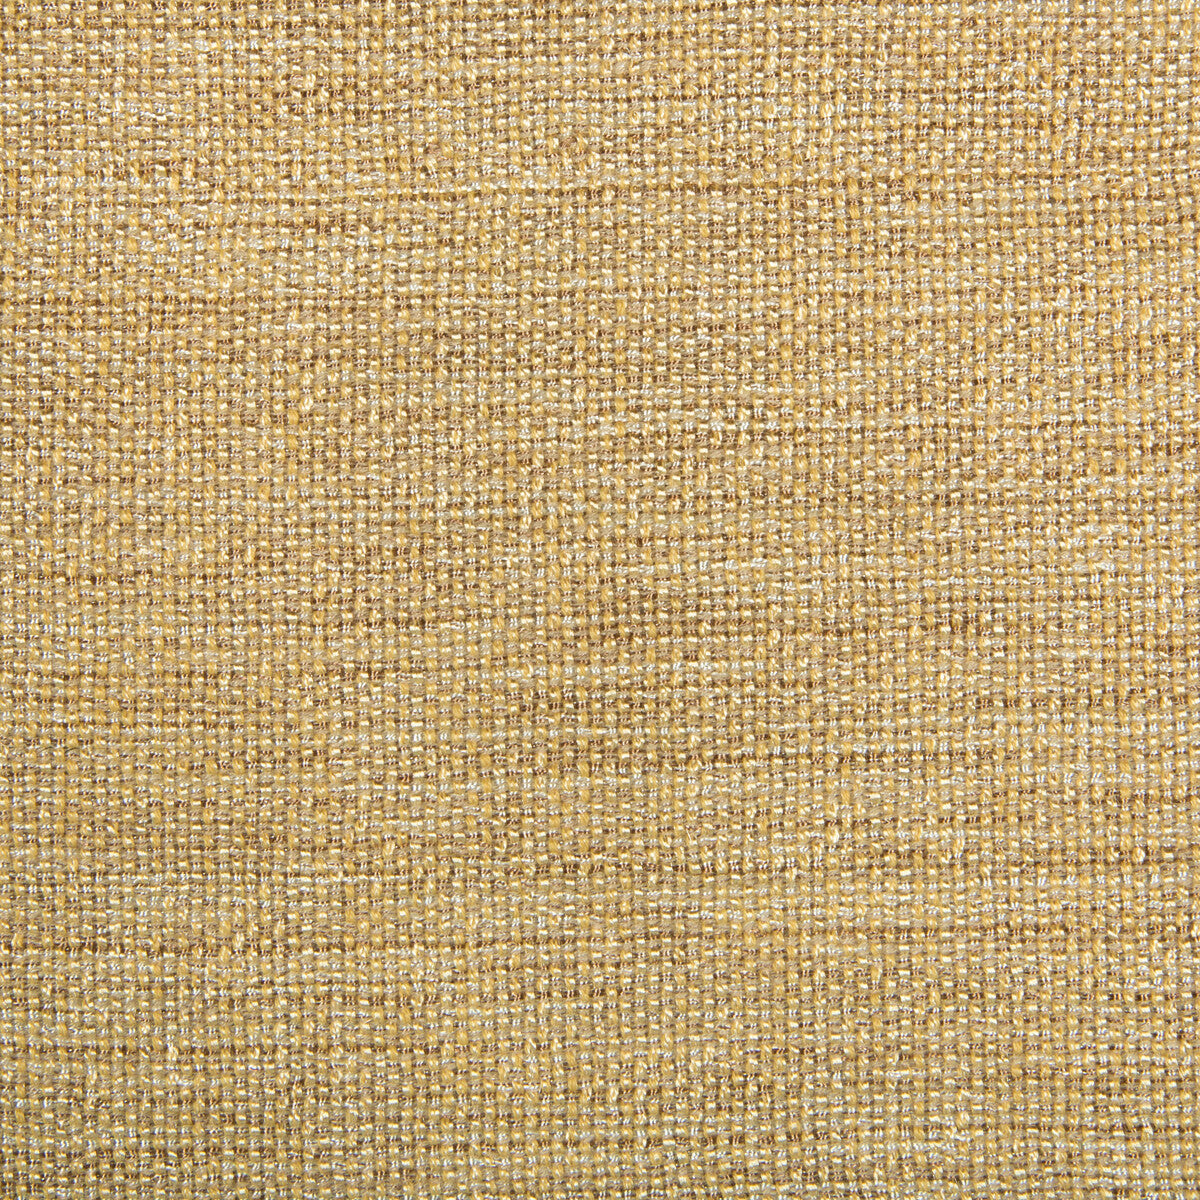 Kravet Contract fabric in 34926-414 color - pattern 34926.414.0 - by Kravet Contract